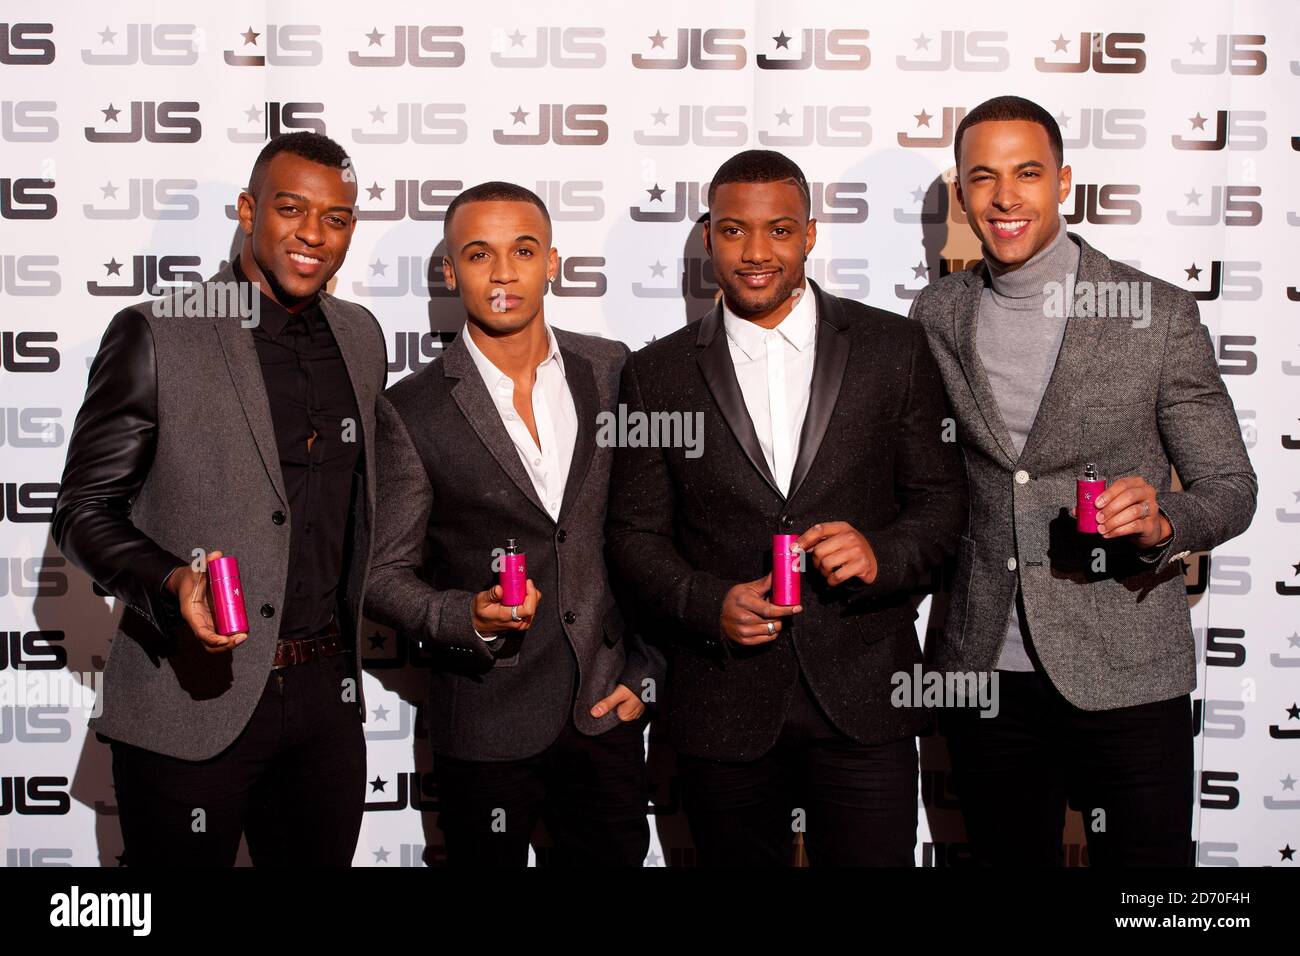 (Left to right) Oritse Williams, Aston Merrygold, J B Gill and Marvin Humes of JLS, pictured at the launch of their new fragrance, JLS Love, at One Mayfair in Central London. Stock Photo